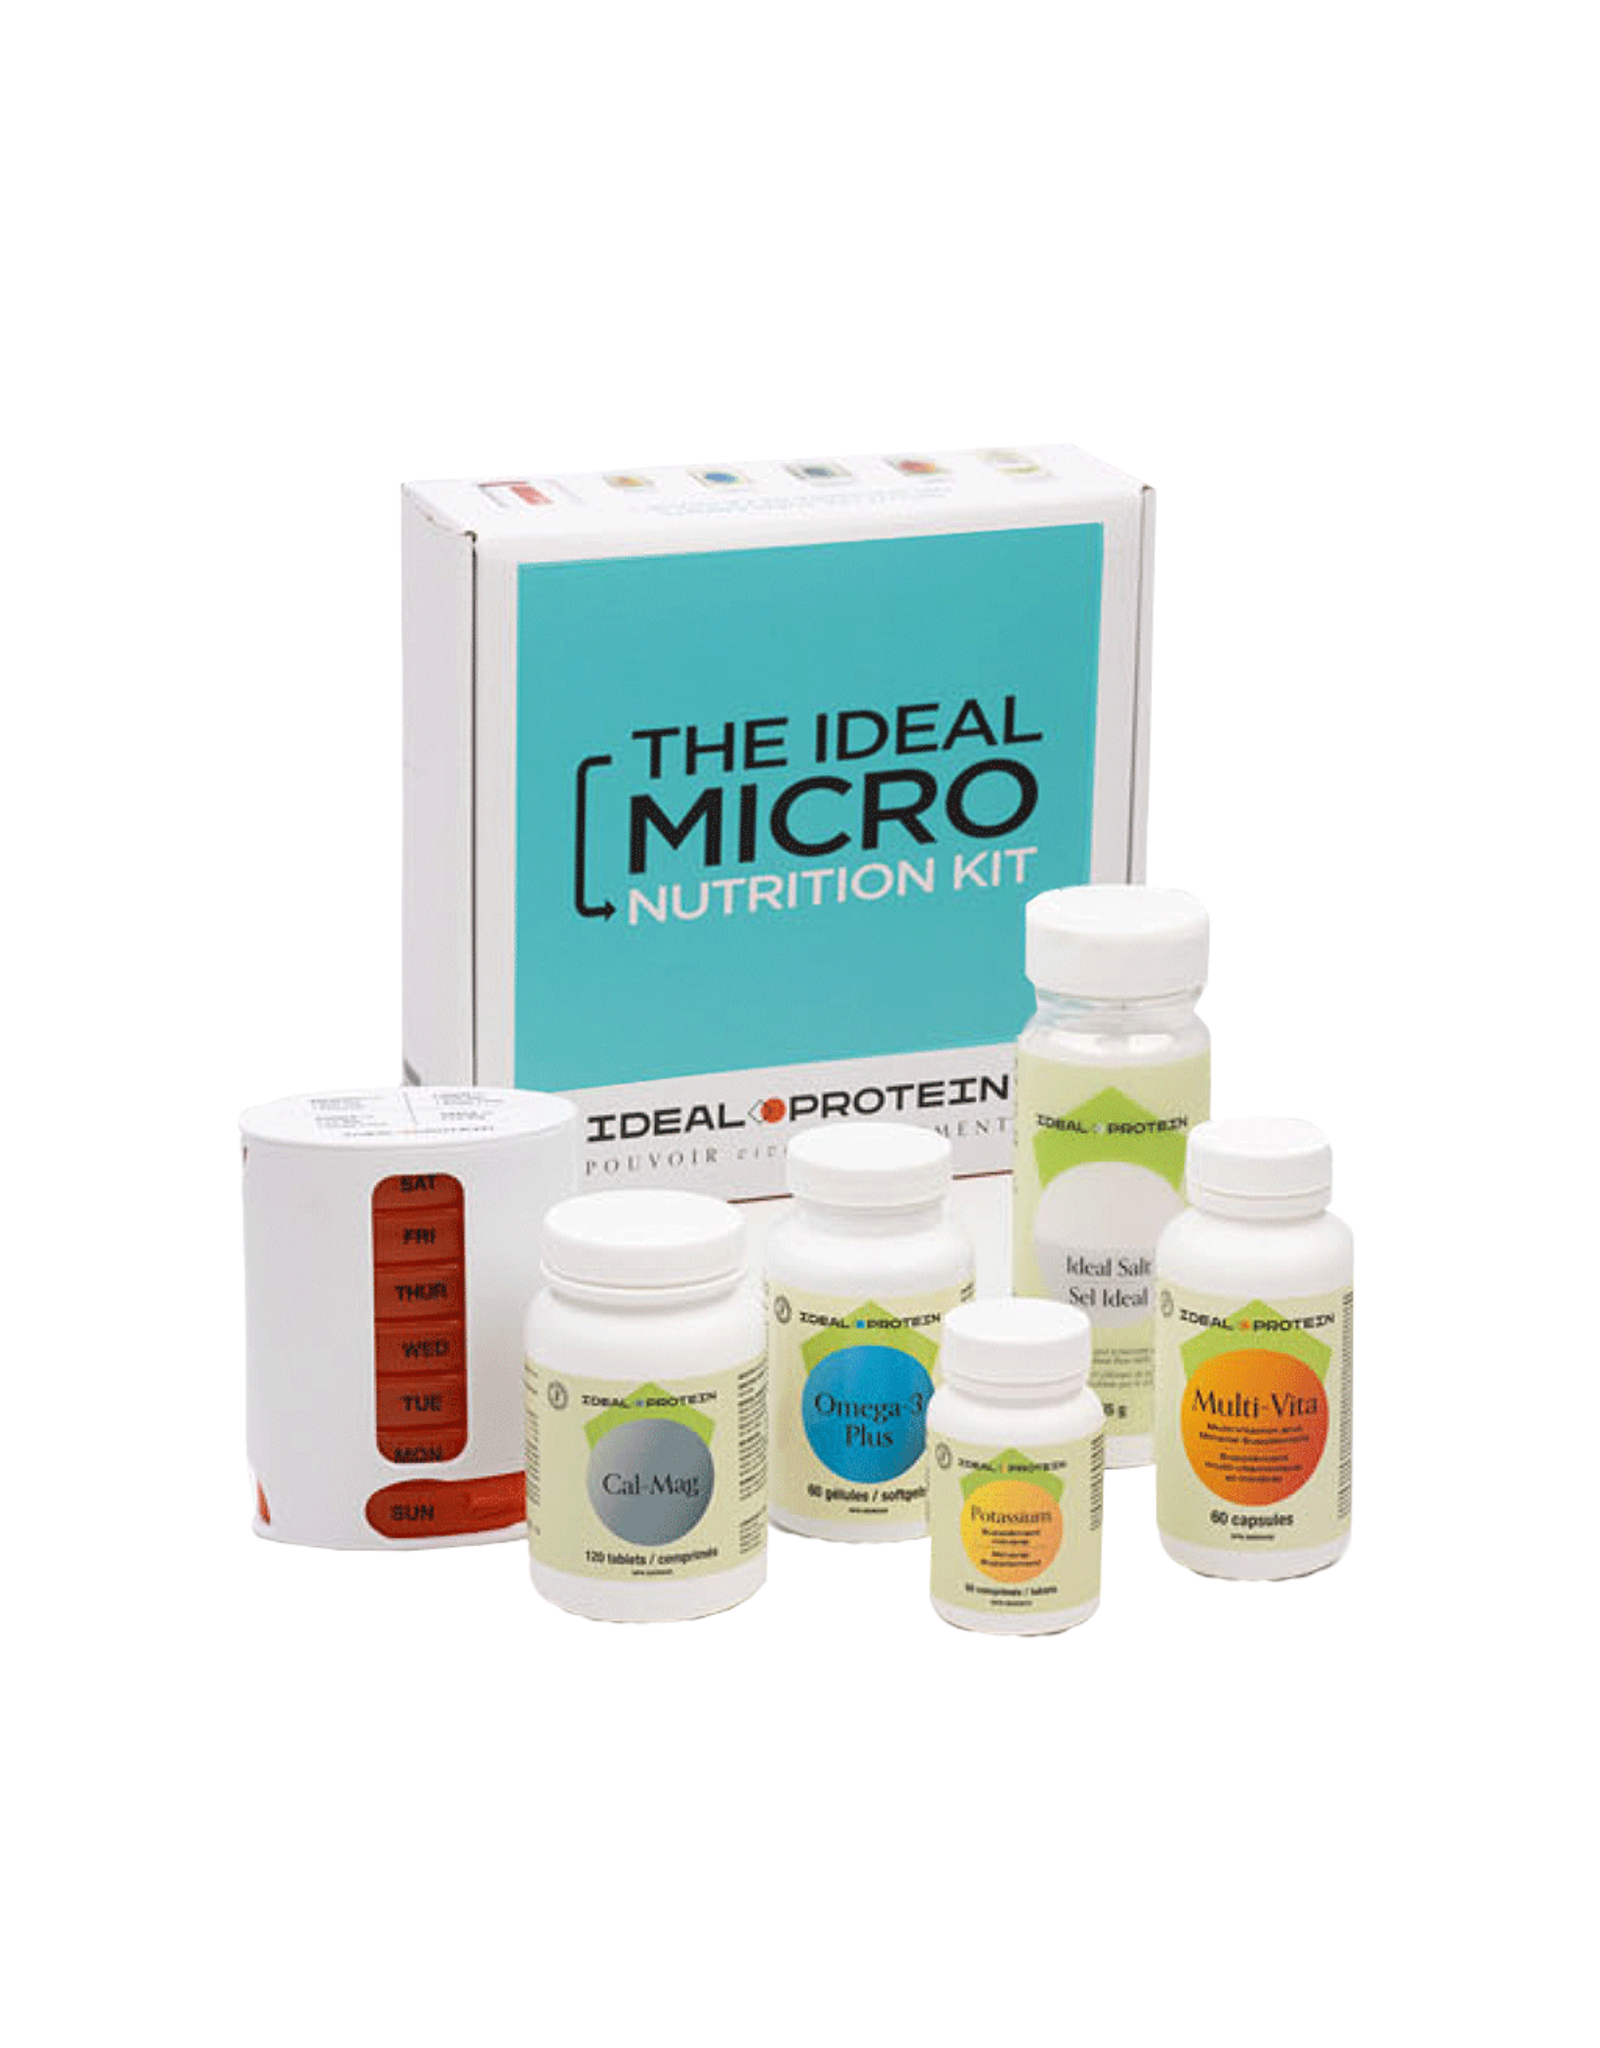 Ideal Protein The Ideal Micro Nutrition Kit